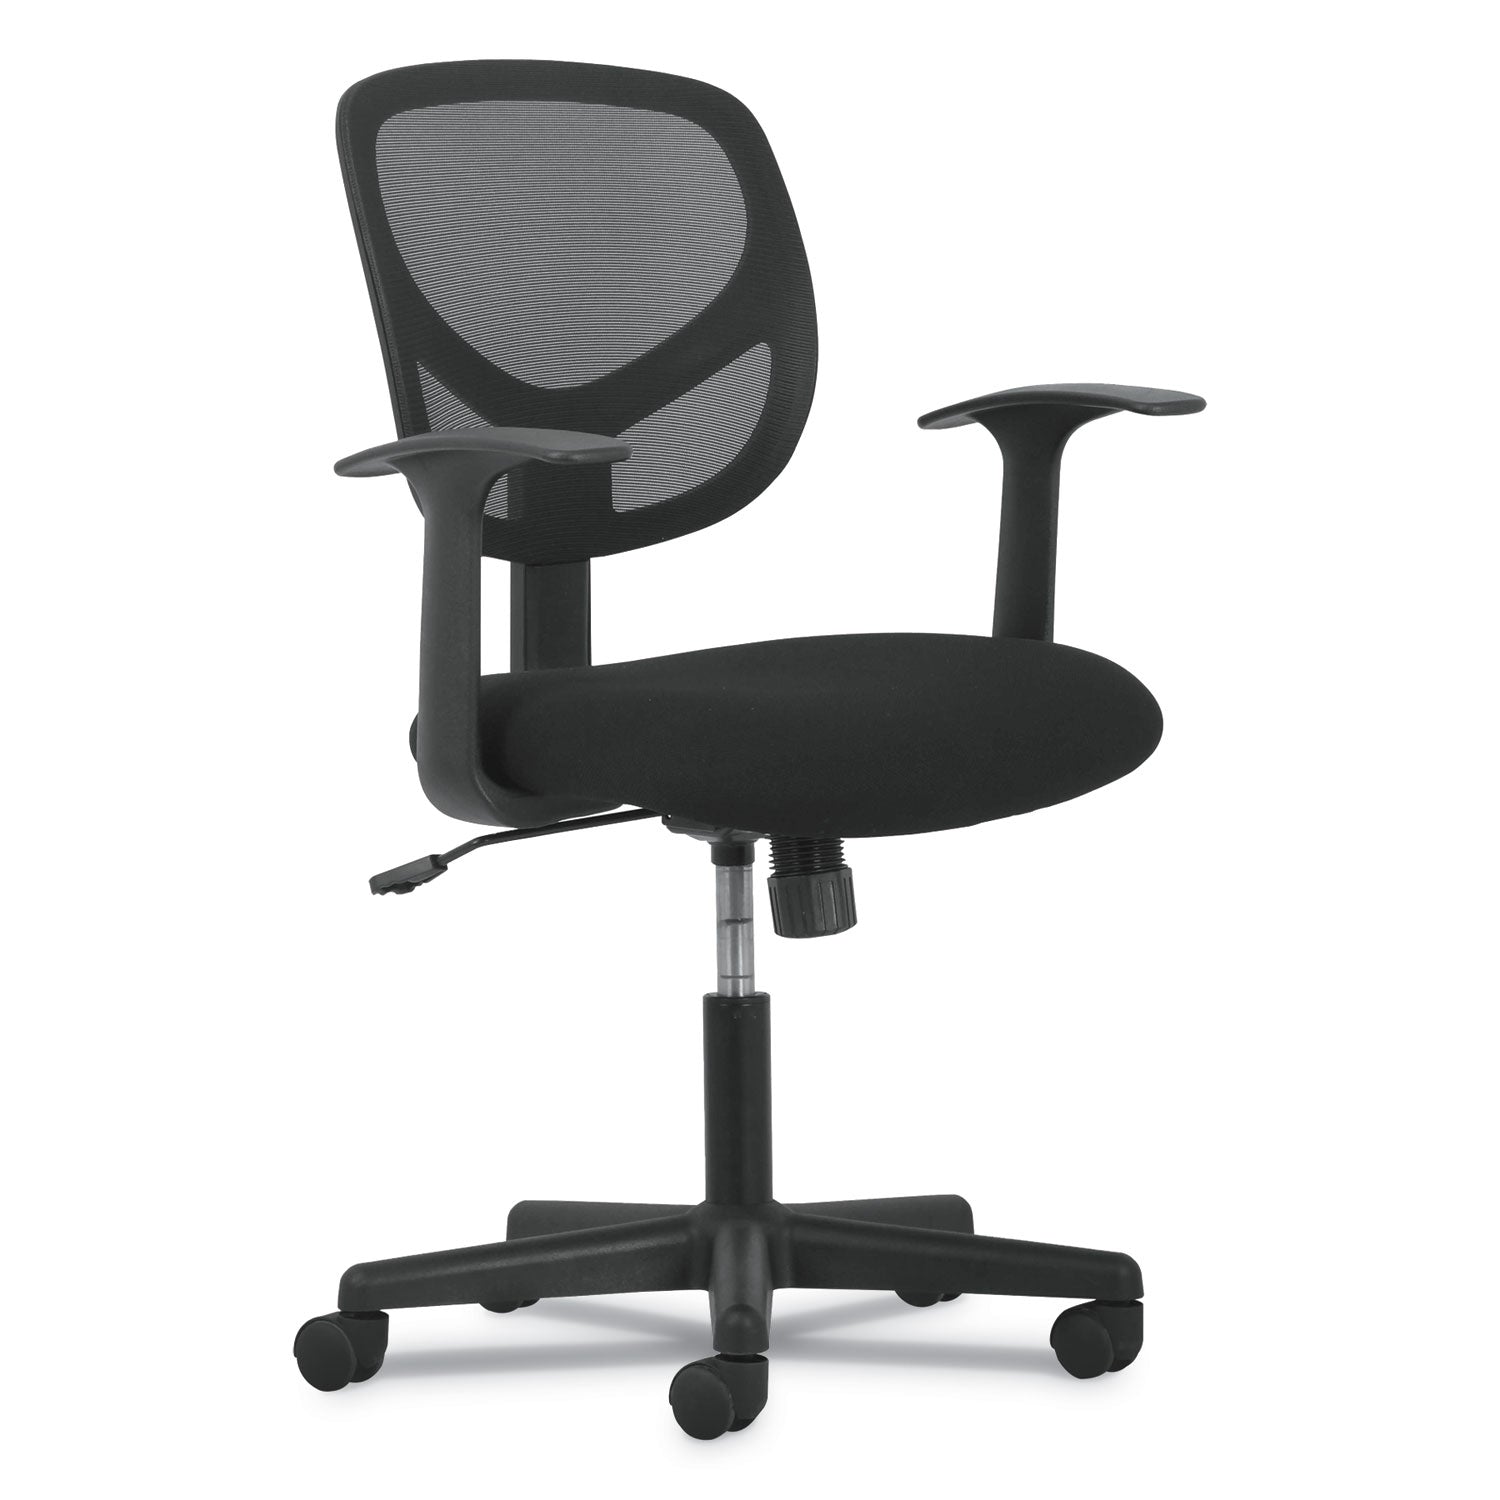 1-oh-two-mid-back-task-chairs-supports-up-to-250-lb-17-to-22-seat-height-black_bsxvst102 - 1